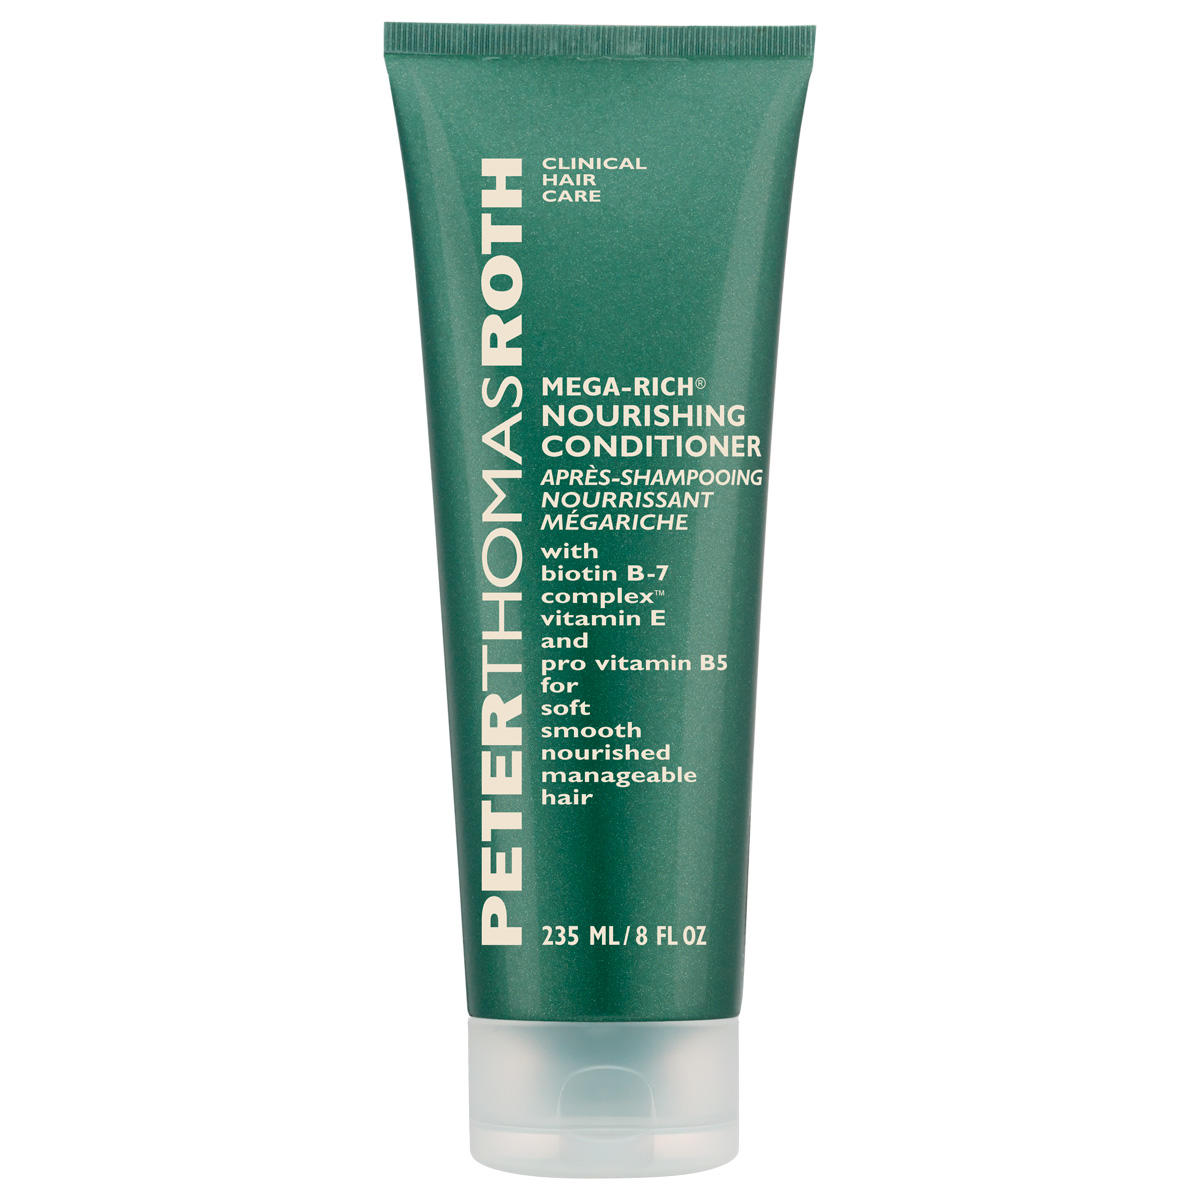 PETER THOMAS ROTH CLINICAL HAIR CARE Mega-Riche Nourishing Conditioner 235 ml - 1